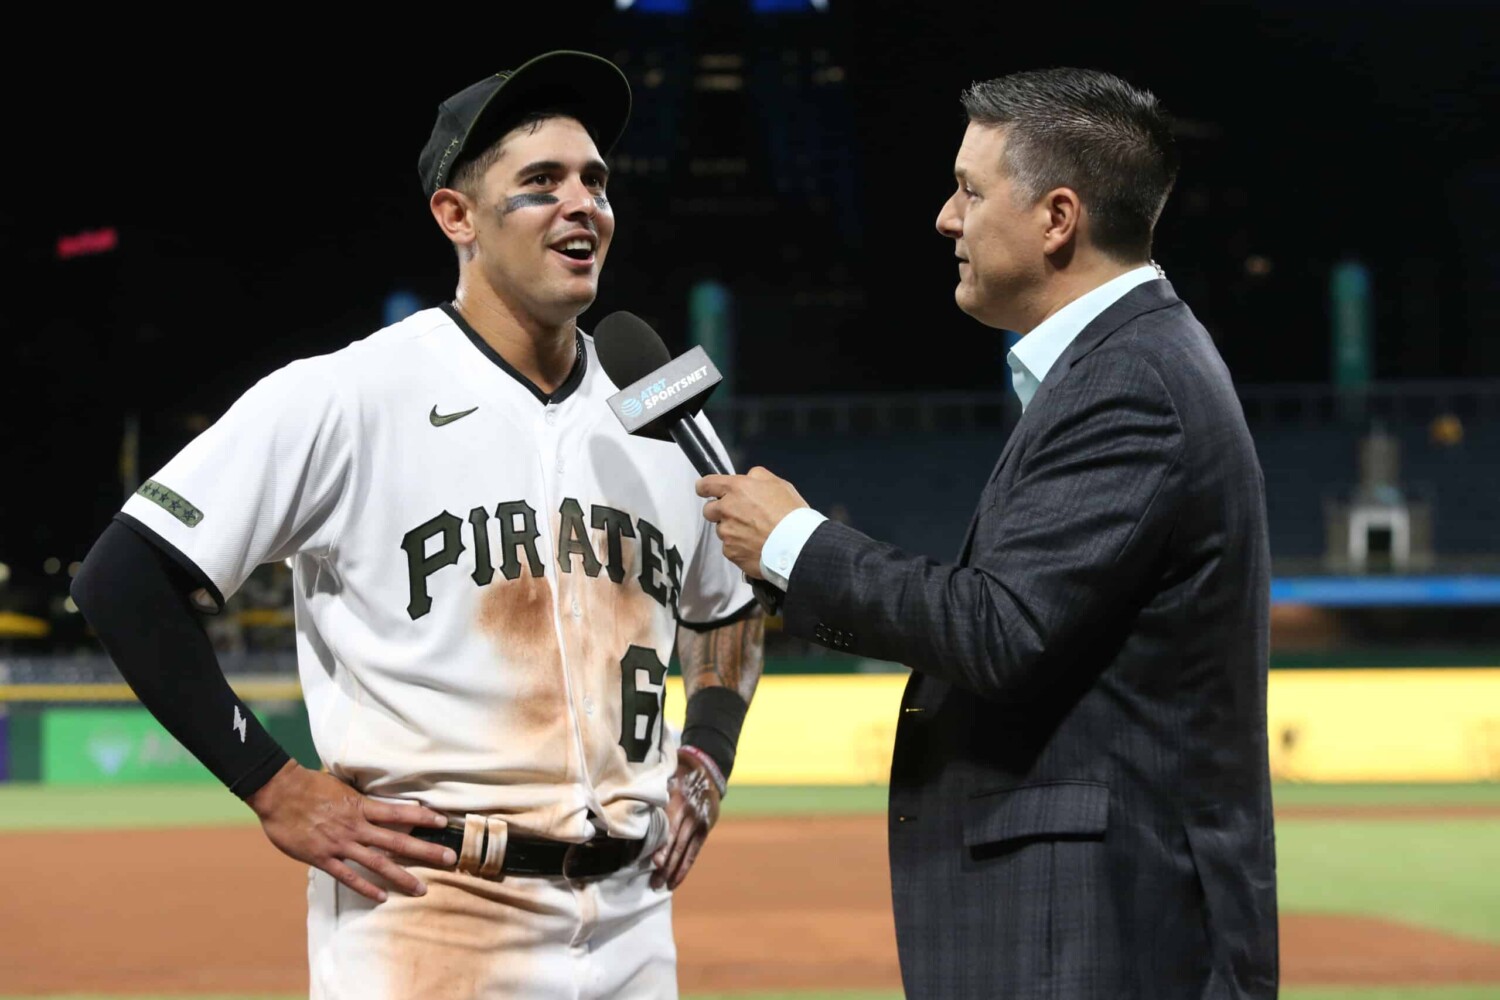 AT&T SportsNet reporter interviews Pittsburgh Pirates player.